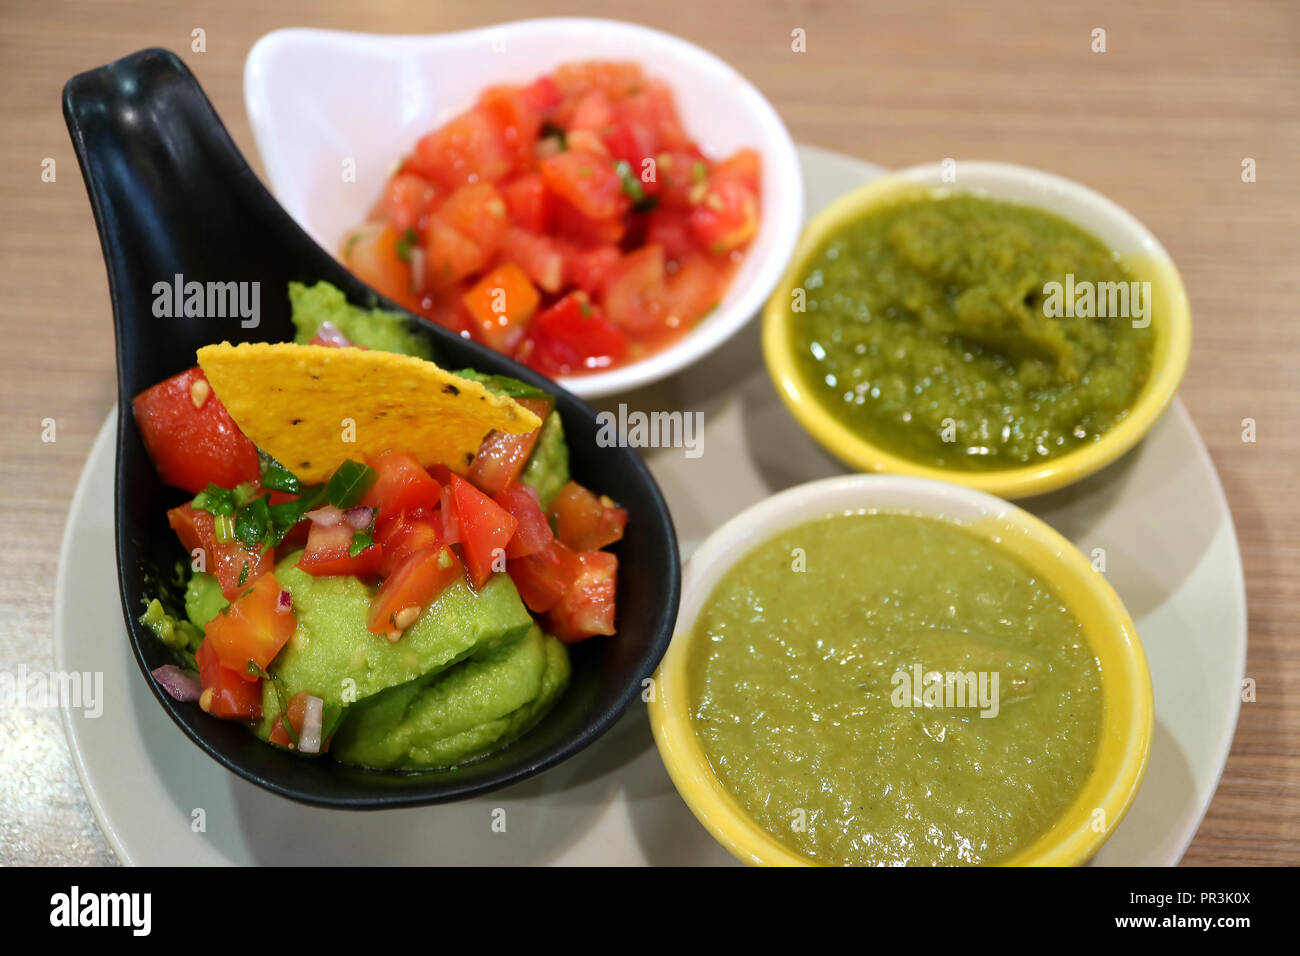 Guacamole and Various Salsa Sauce, Colorful Spicy Mexican Sauce on Wooden Table Stock Photo